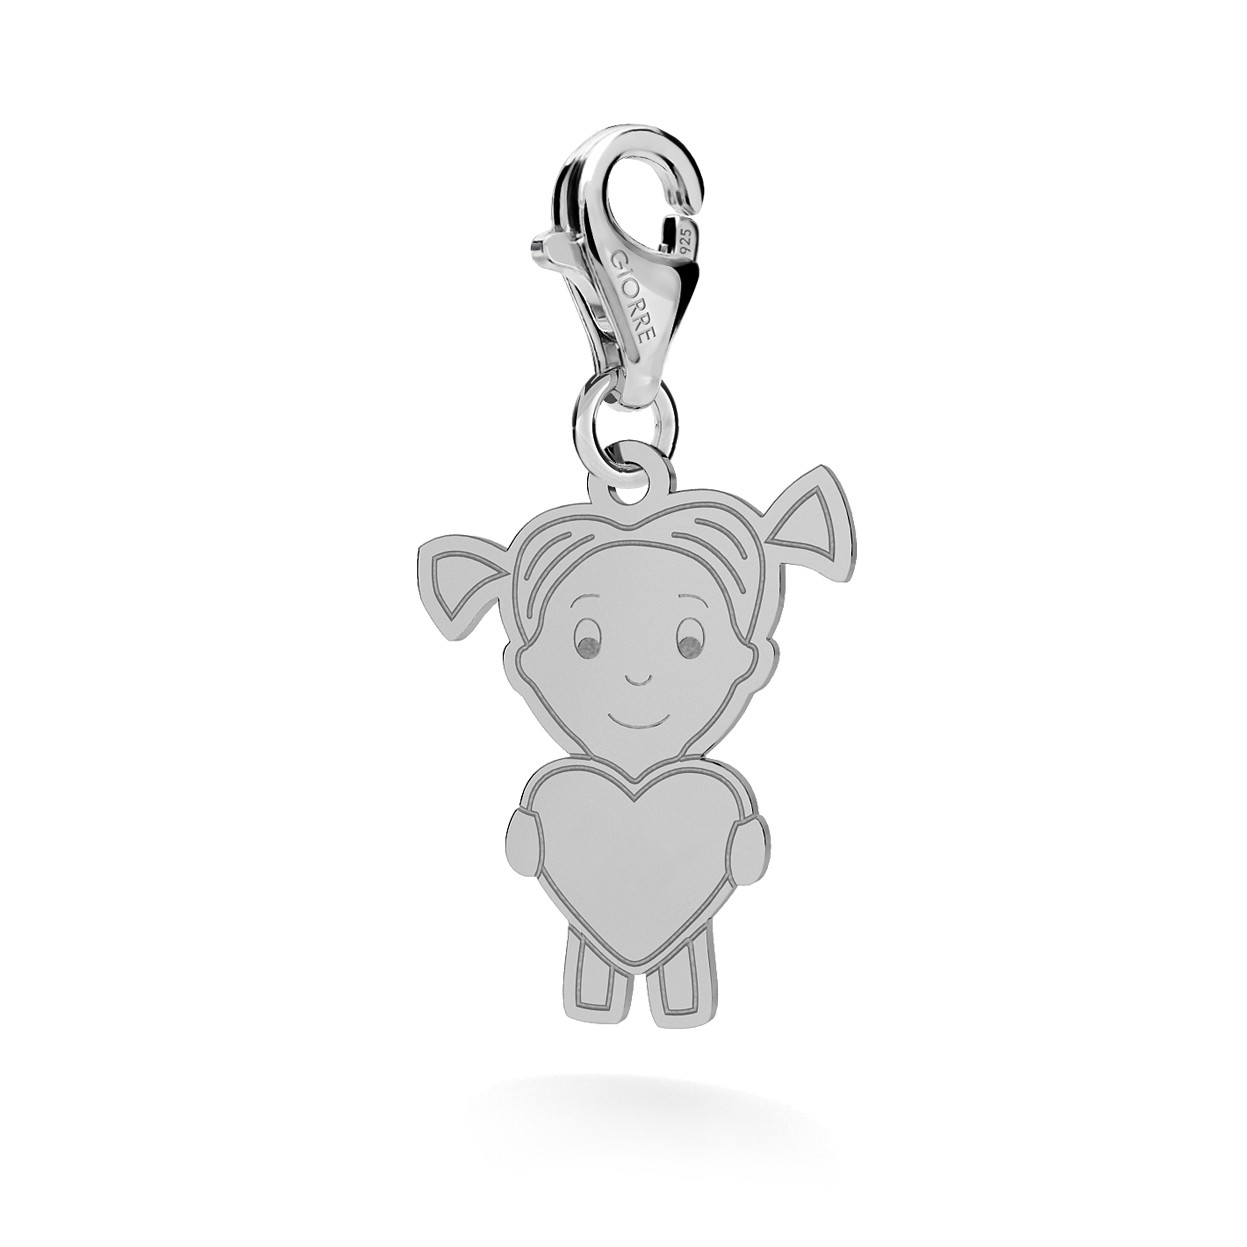 CHARM 130, GIRL OR BOY WITH ENGRAVE, STERLING SILVER (925) RHODIUM OR GOLD PLATED